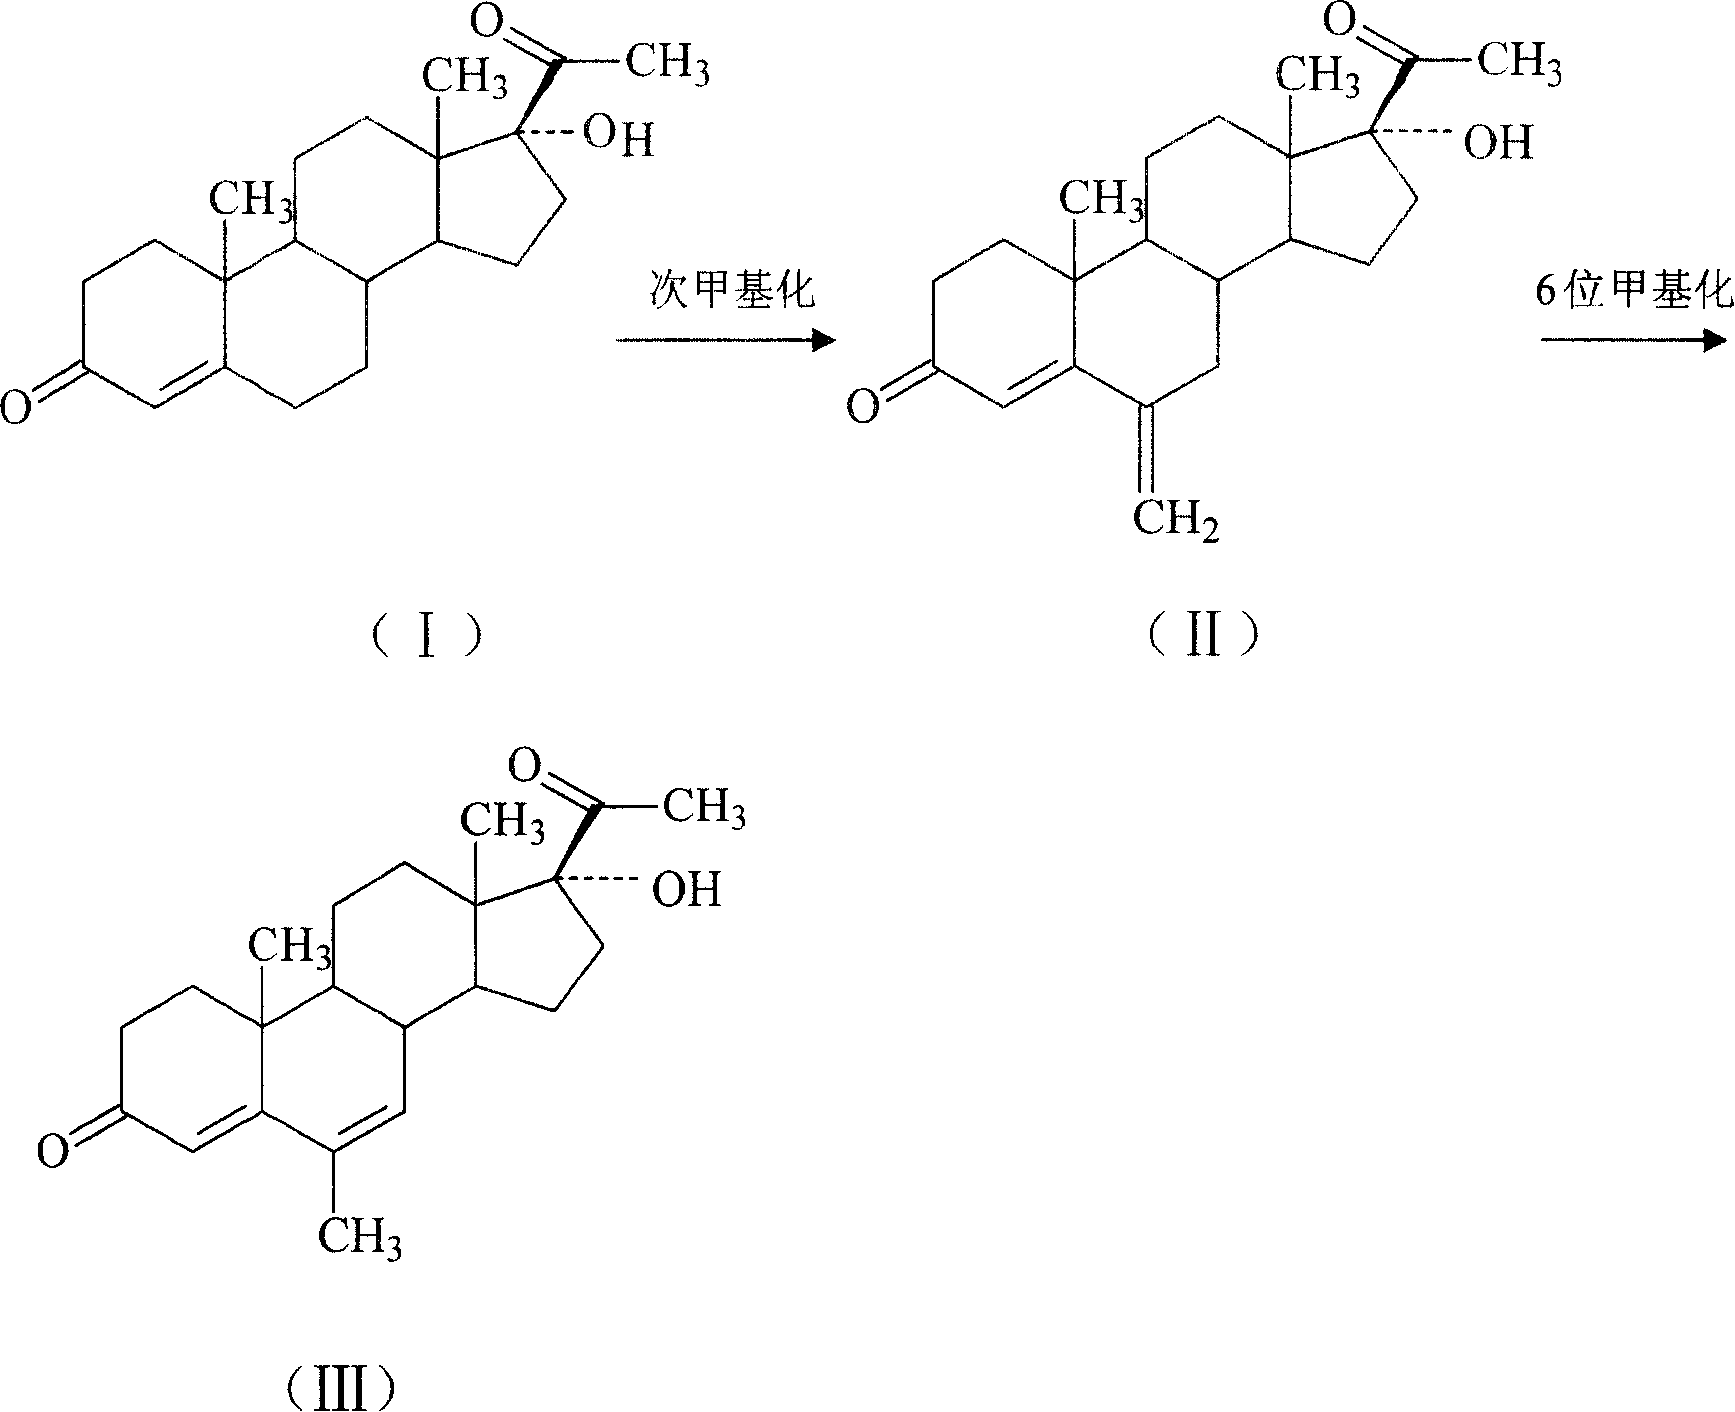 Chemical synthesis of free megestrol